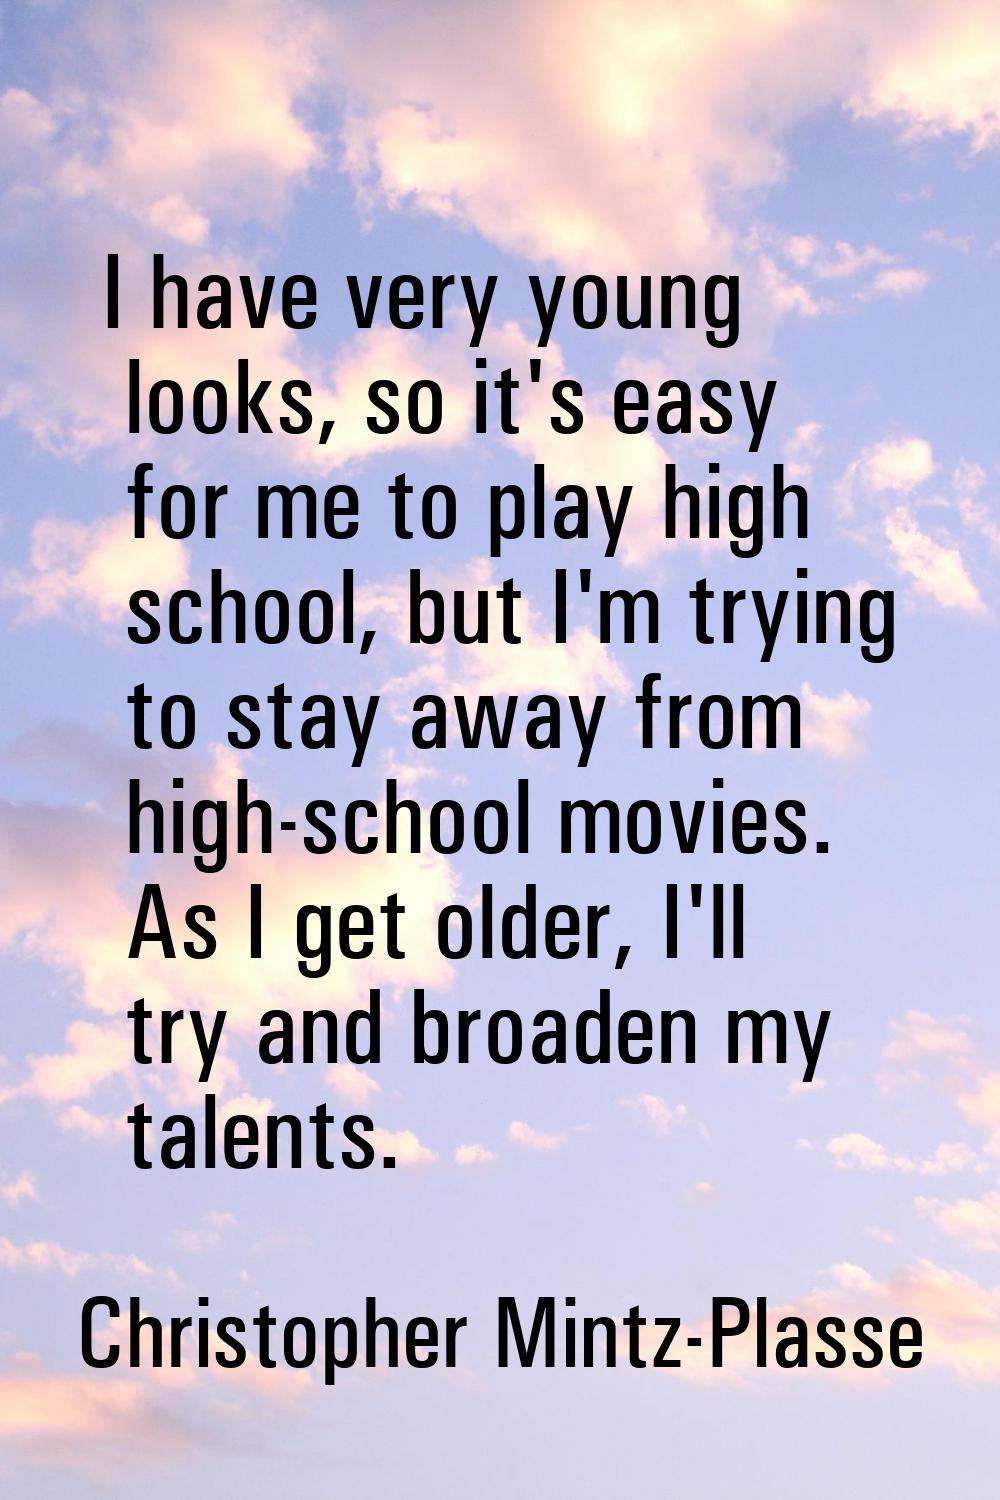 I have very young looks, so it's easy for me to play high school, but I'm trying to stay away from 